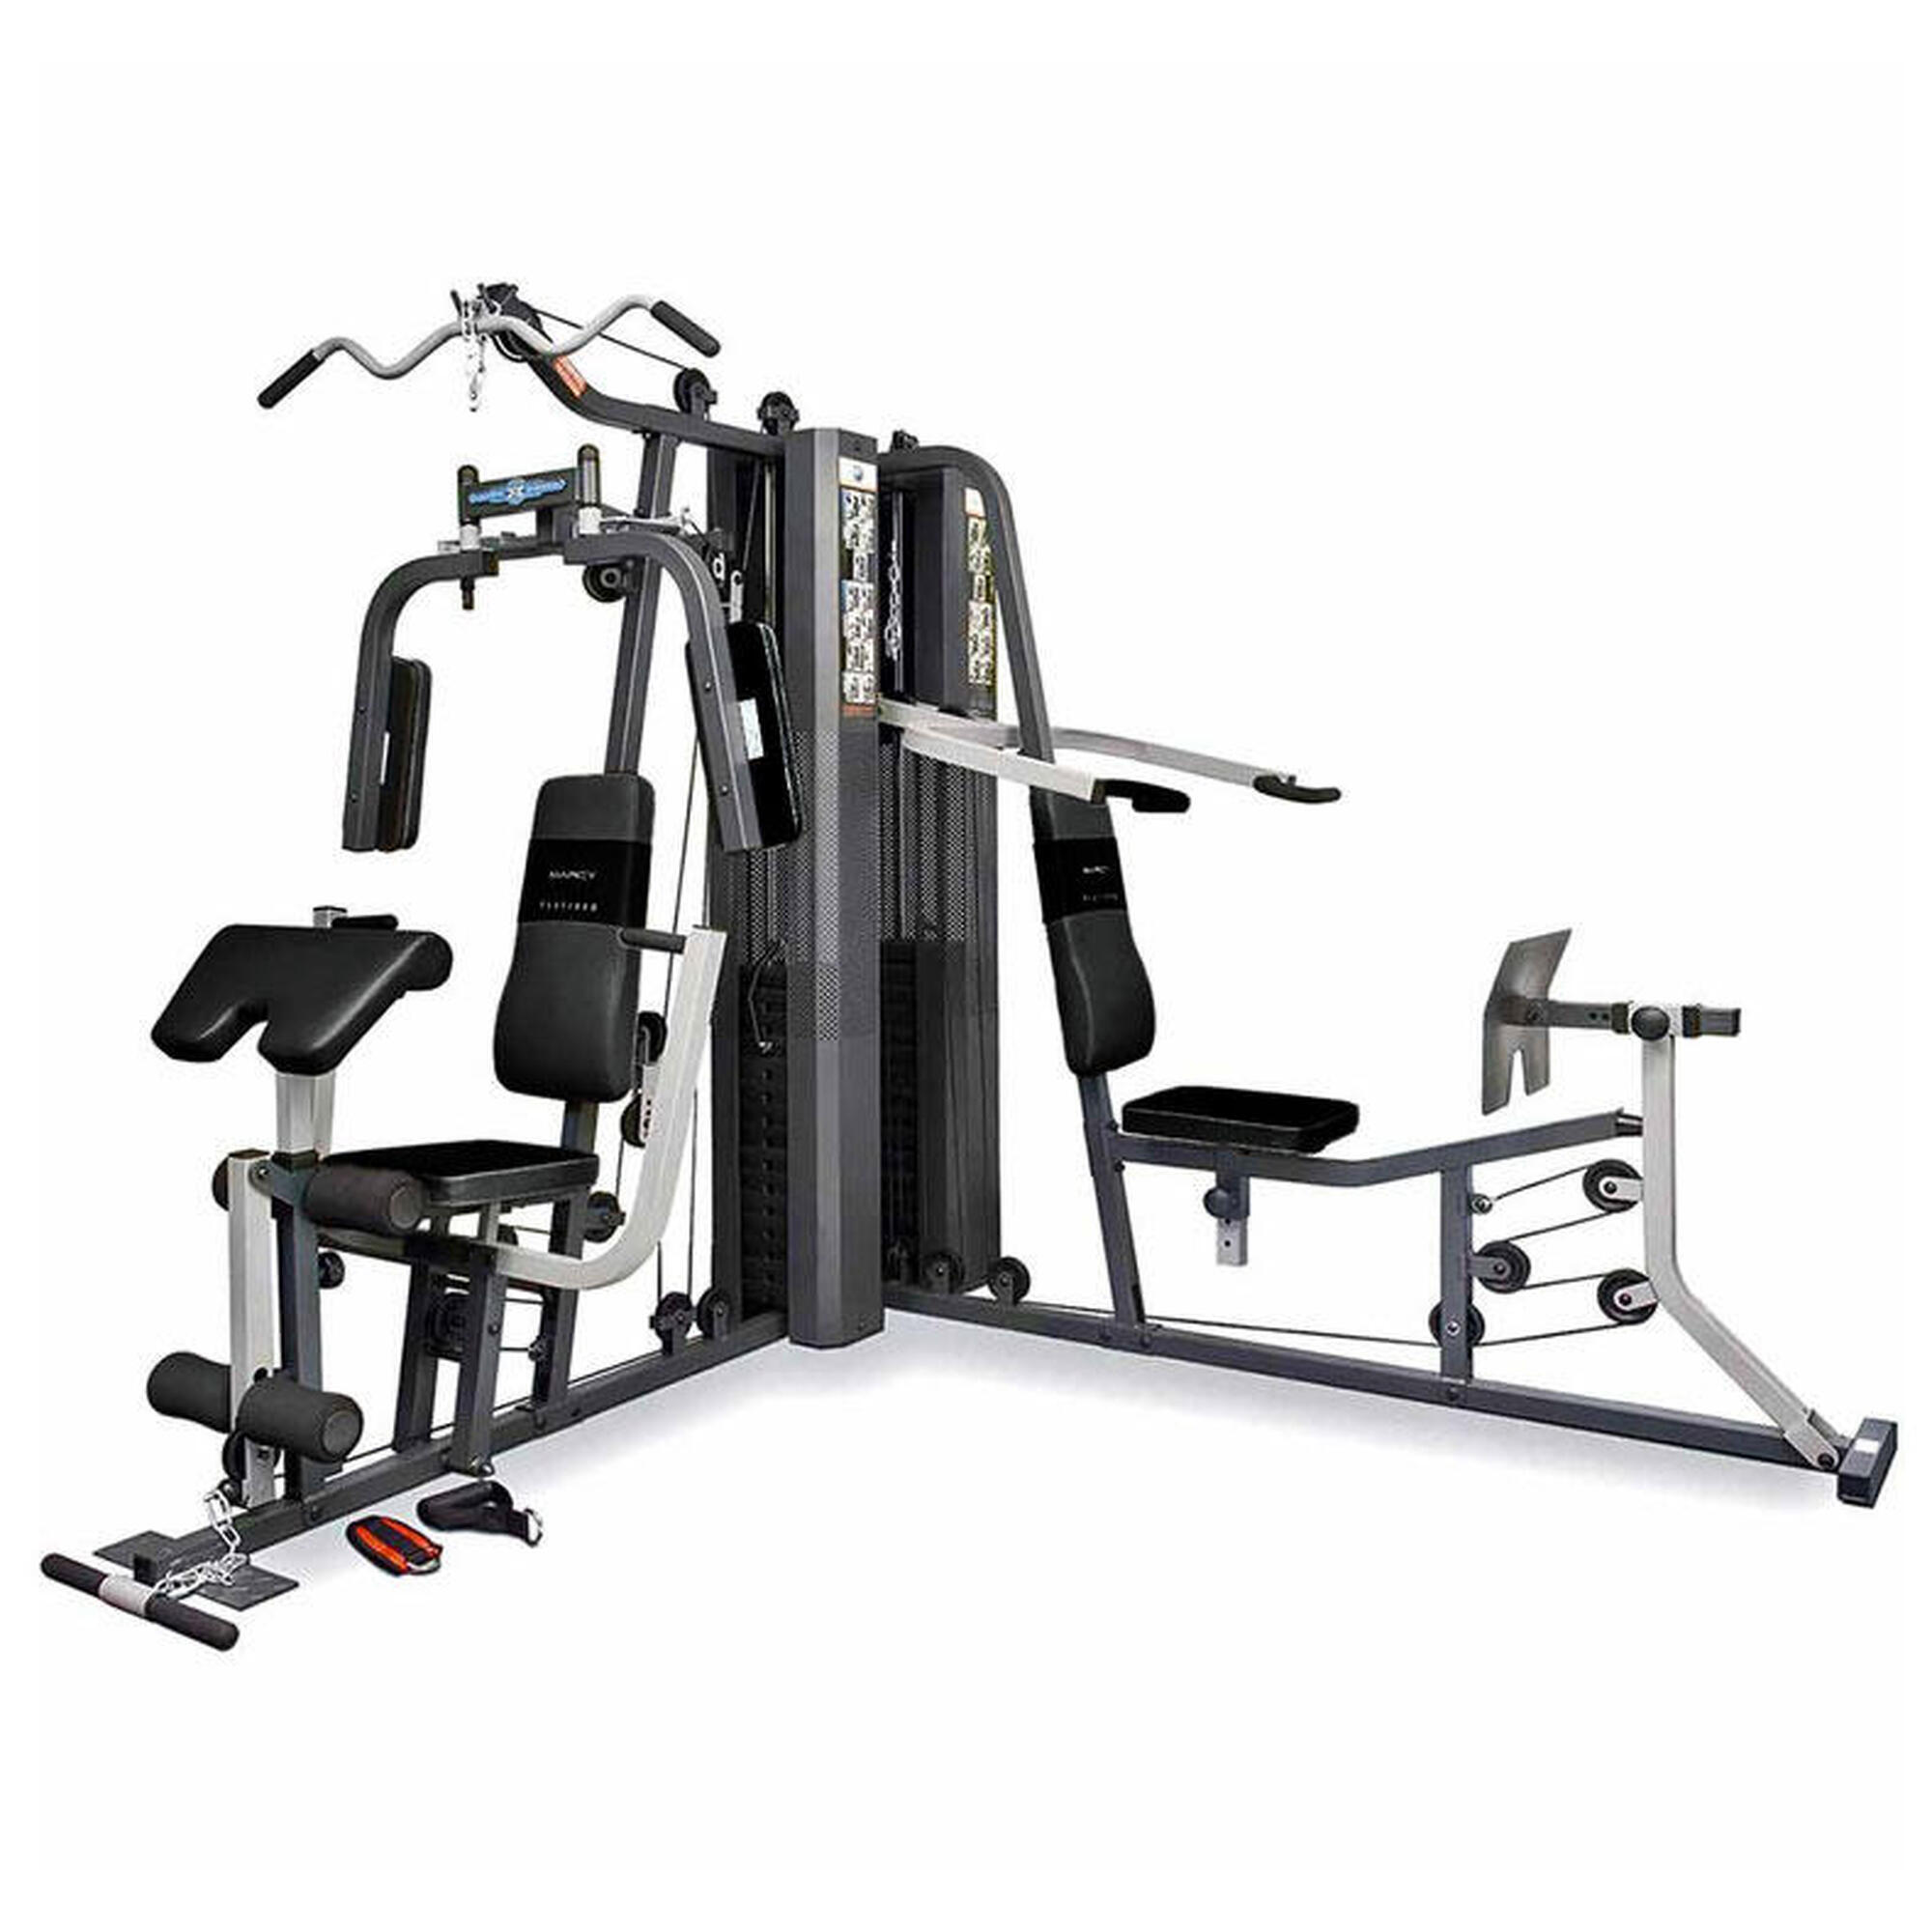 MARCY GS99 DUAL STACK HOME CORNER MULTI GYM 1/7